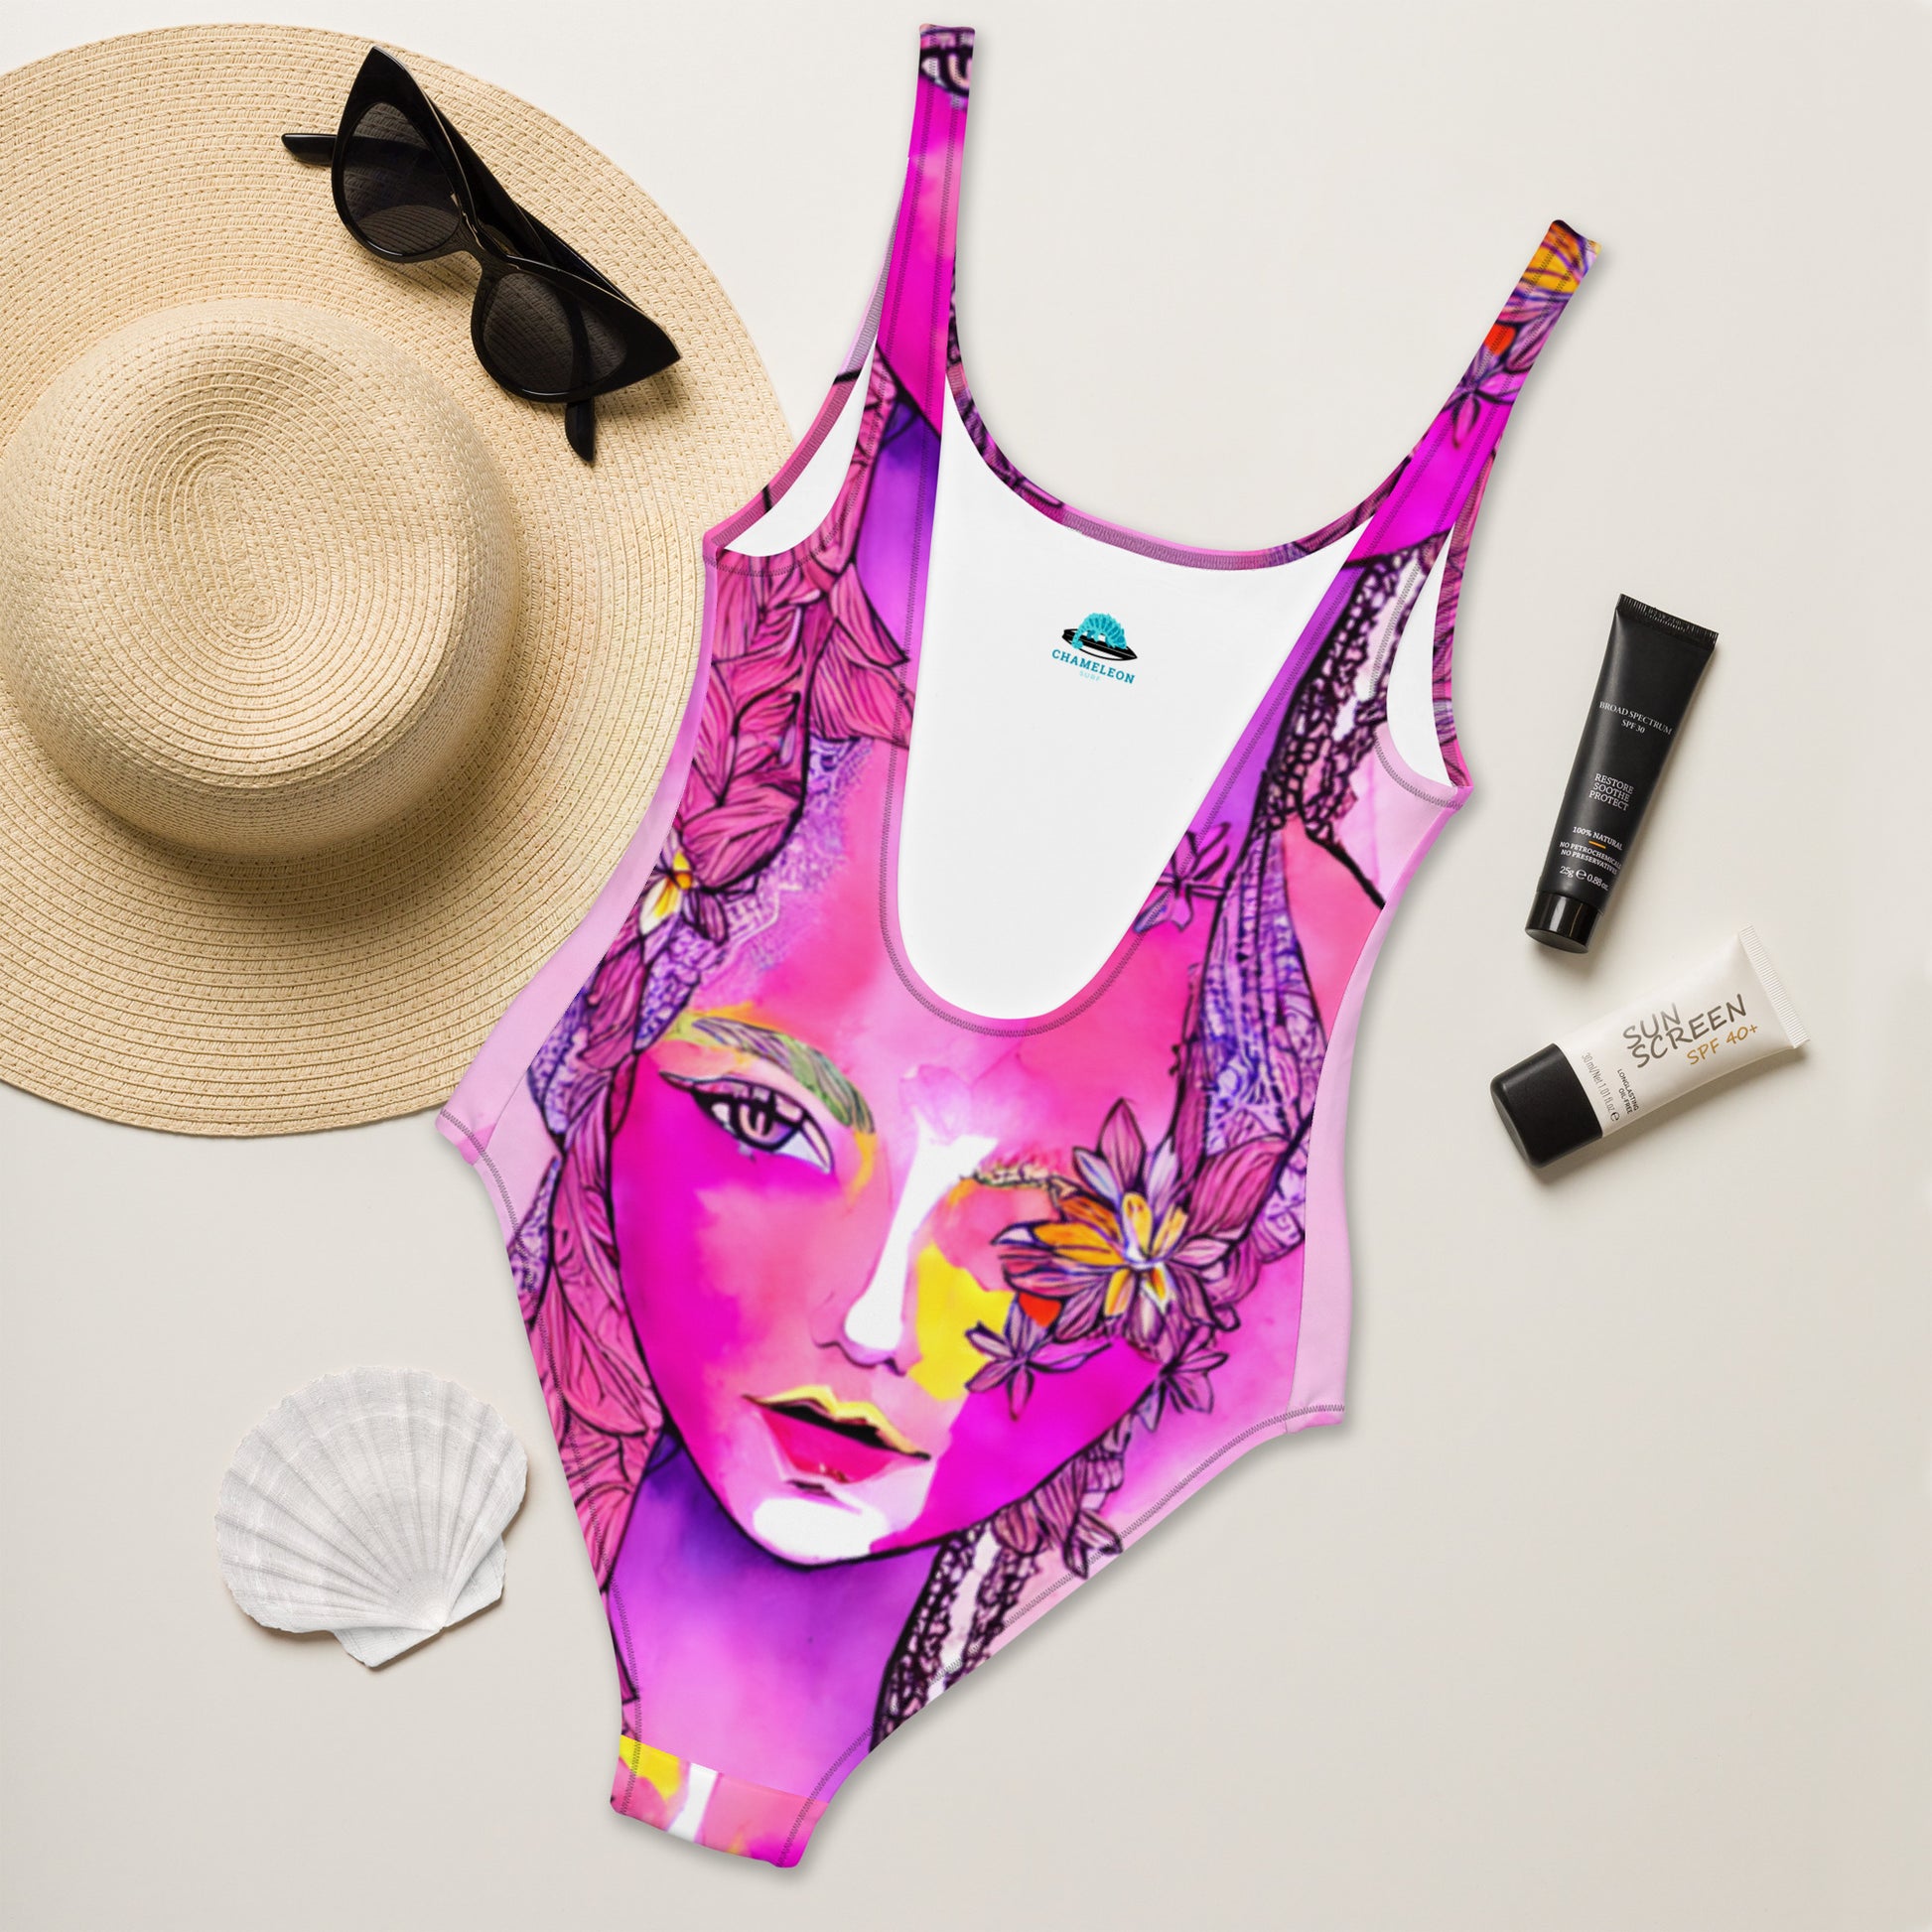 Introducing the Pink Bohemian Goddess One-Piece Swimsuit by Chameleon Surf Brand! Dive into summer style with this chic and eco-friendly swimsuit. Made for the modern goddess who embraces both fashion and sustainability. Get ready to make a splash and stand out on the beach or by the pool. Shop now and channel your inner beach bae #SummerStyle #ChameleonSurf #PinkGoddessSwimsuit #greenswimsuit #pinkbathingsuit #cheekyswimsuit